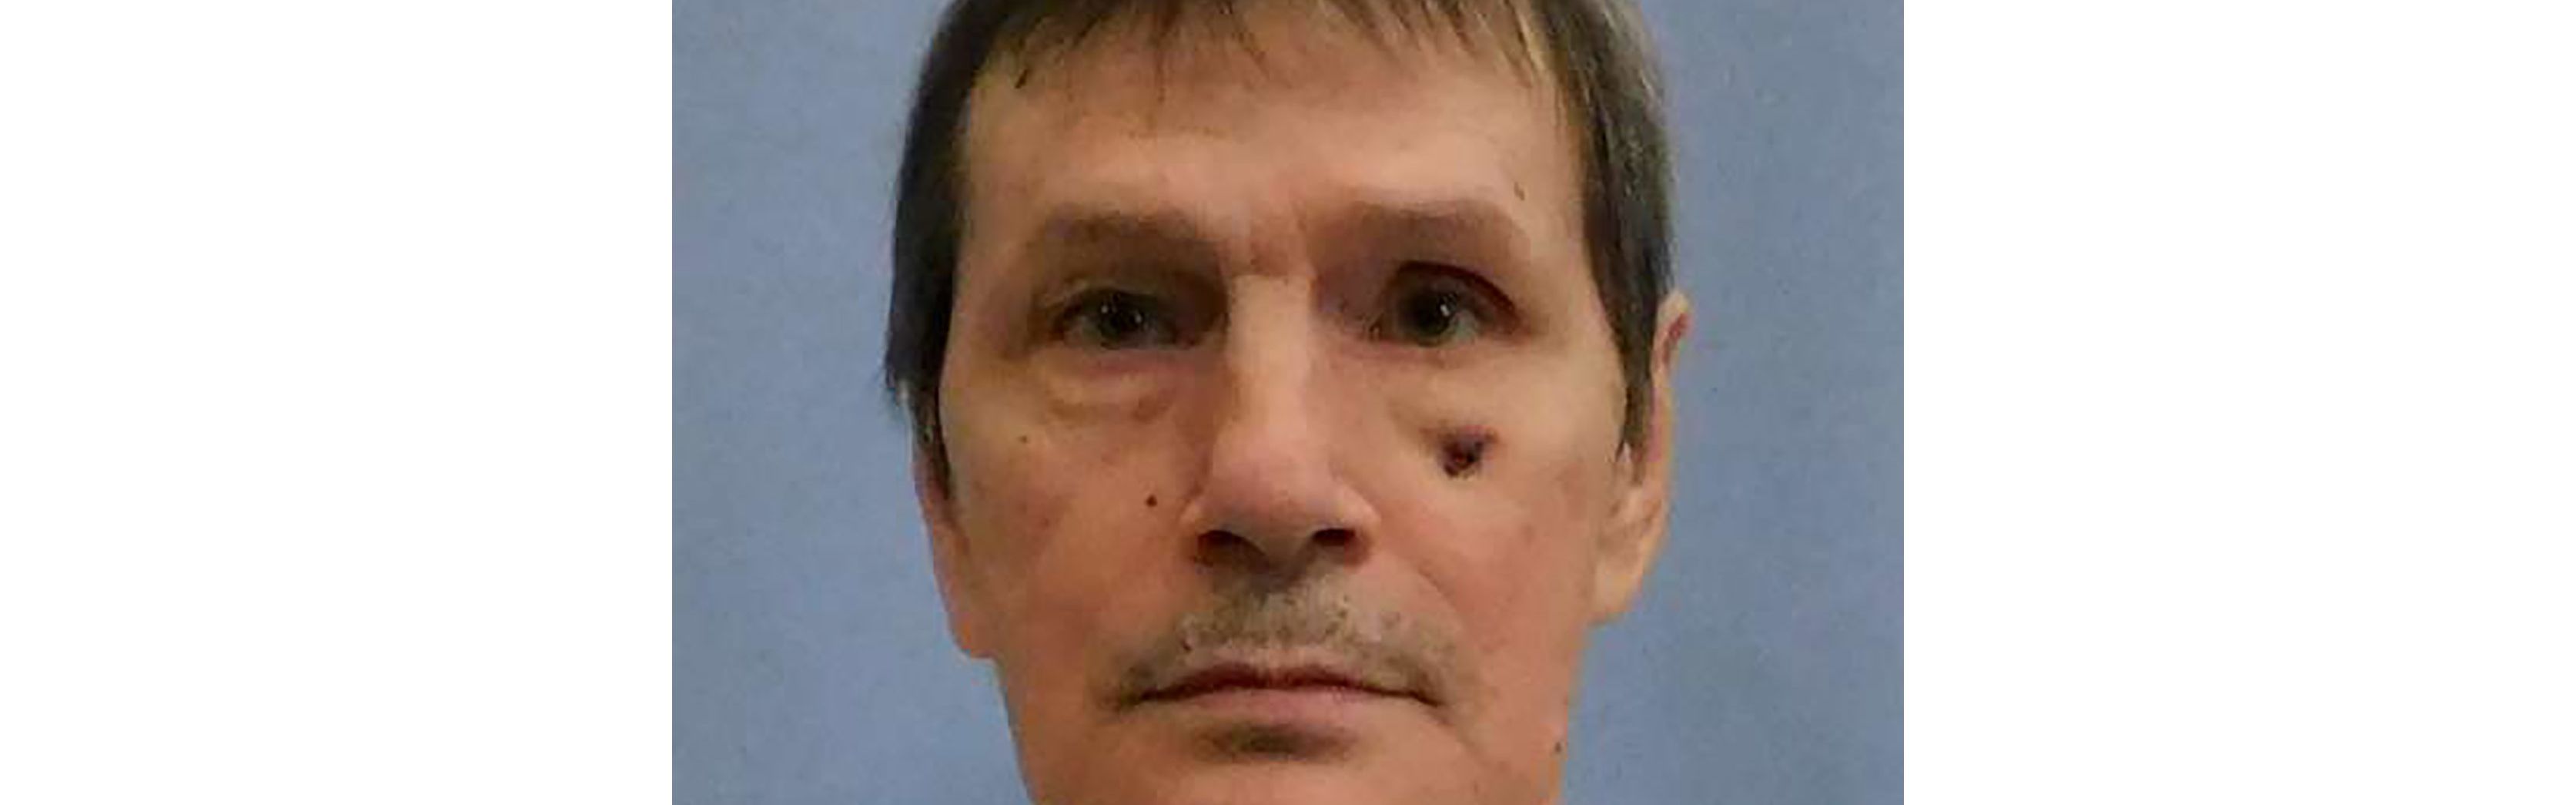 Death row inmate sues after 'botched' execution | CNN